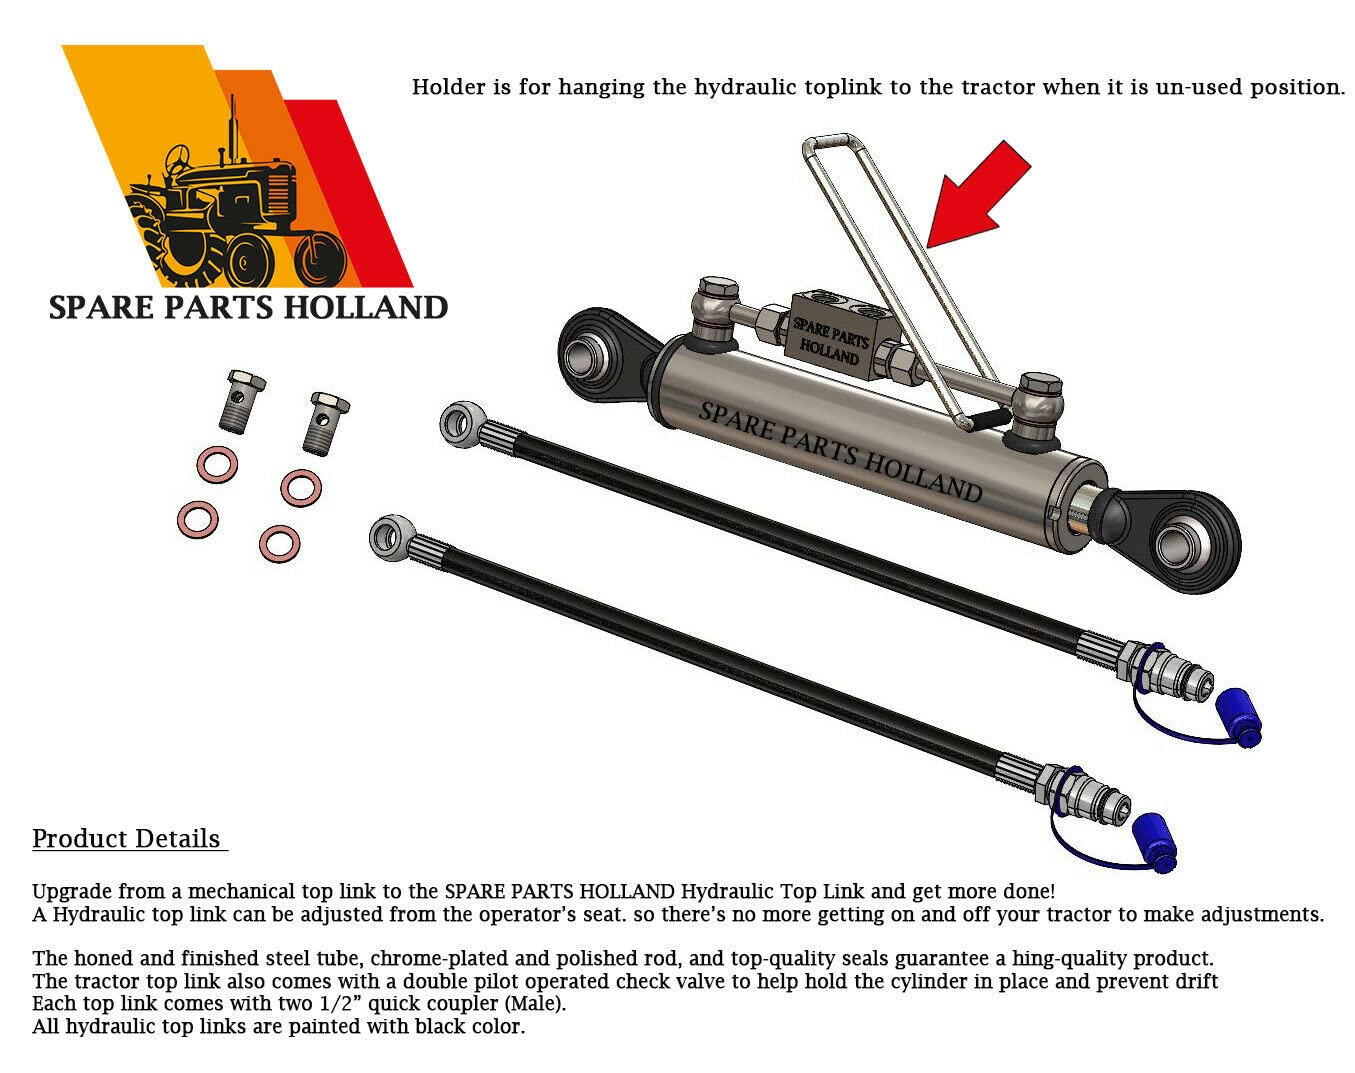 Hydraulic Top Link Cat. 1-1 with Locking Block Min. 16 1/8”→ Max. 22 7/16” with 2 x Hoses Stroke. 6 5/16